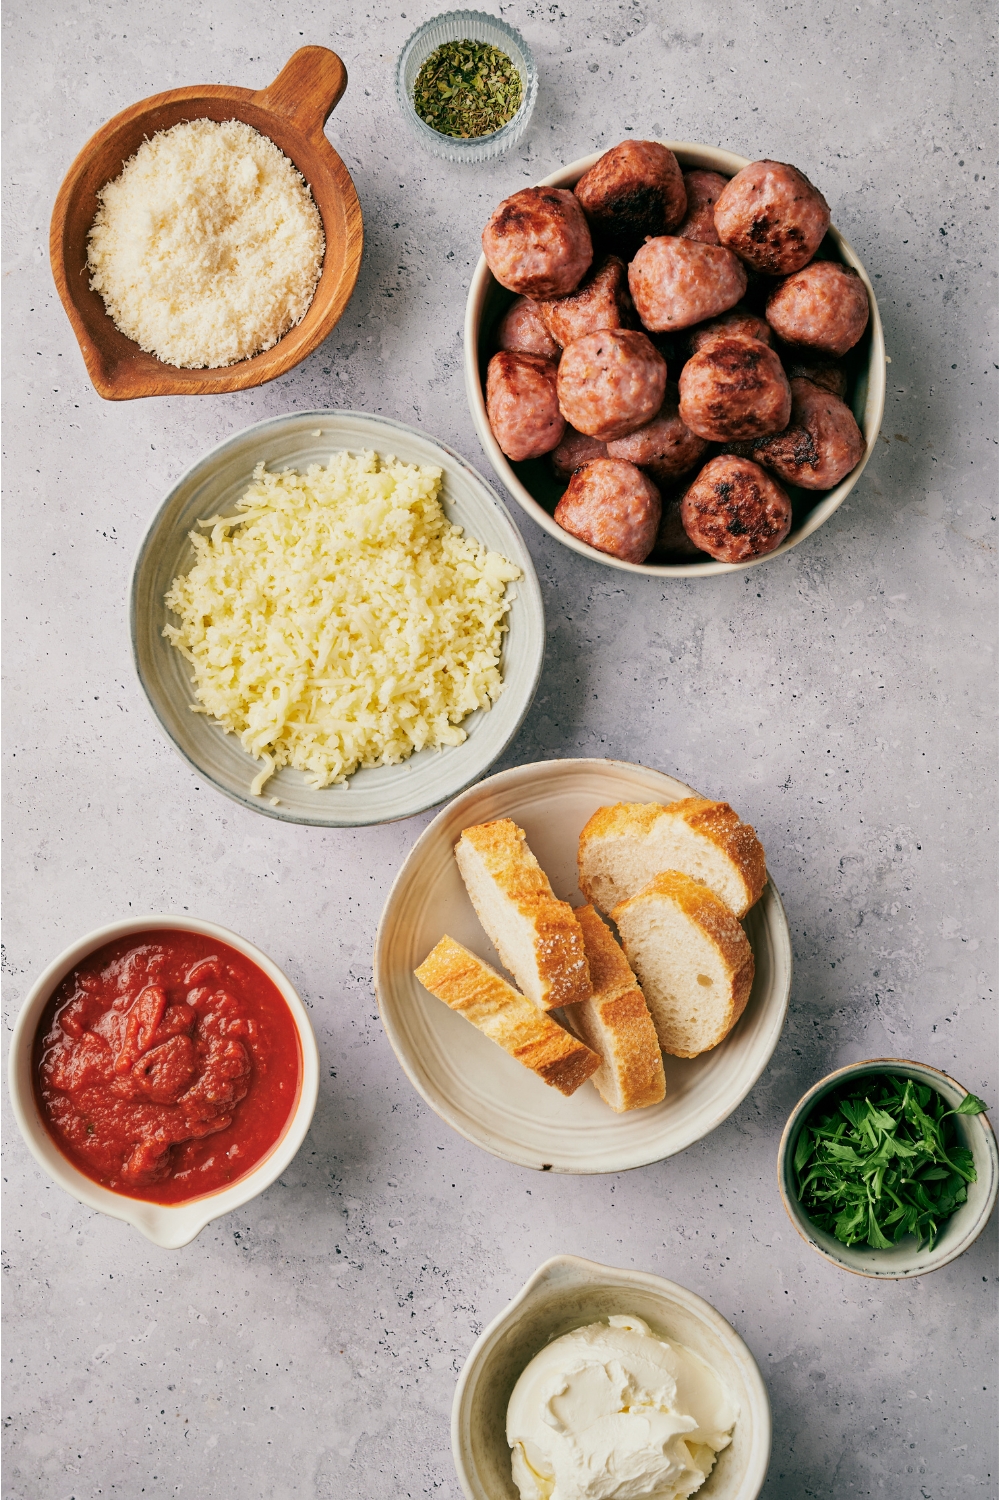 An assortment of ingredients including bowls of shredded cheese, bread slices, meatballs, red sauce, cream cheese, and herbs.